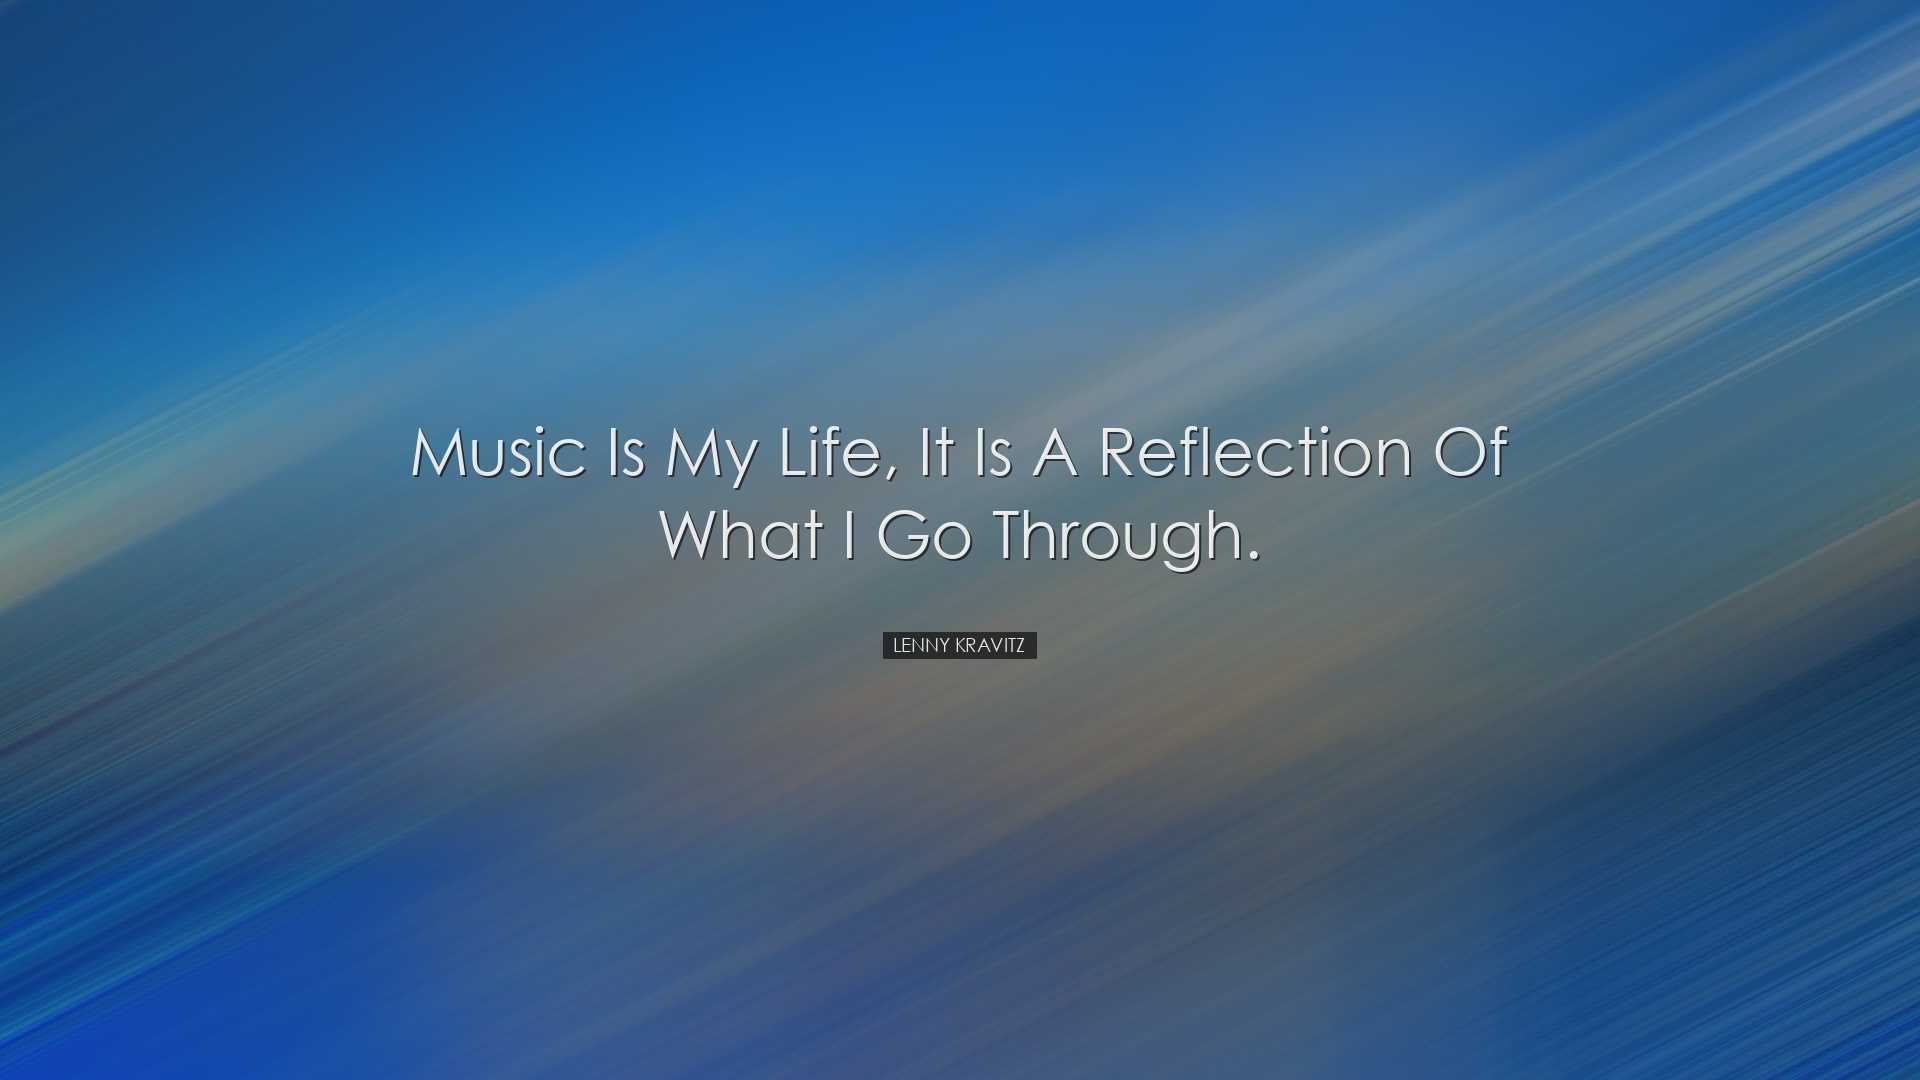 Music is my life, it is a reflection of what I go through. - Lenny